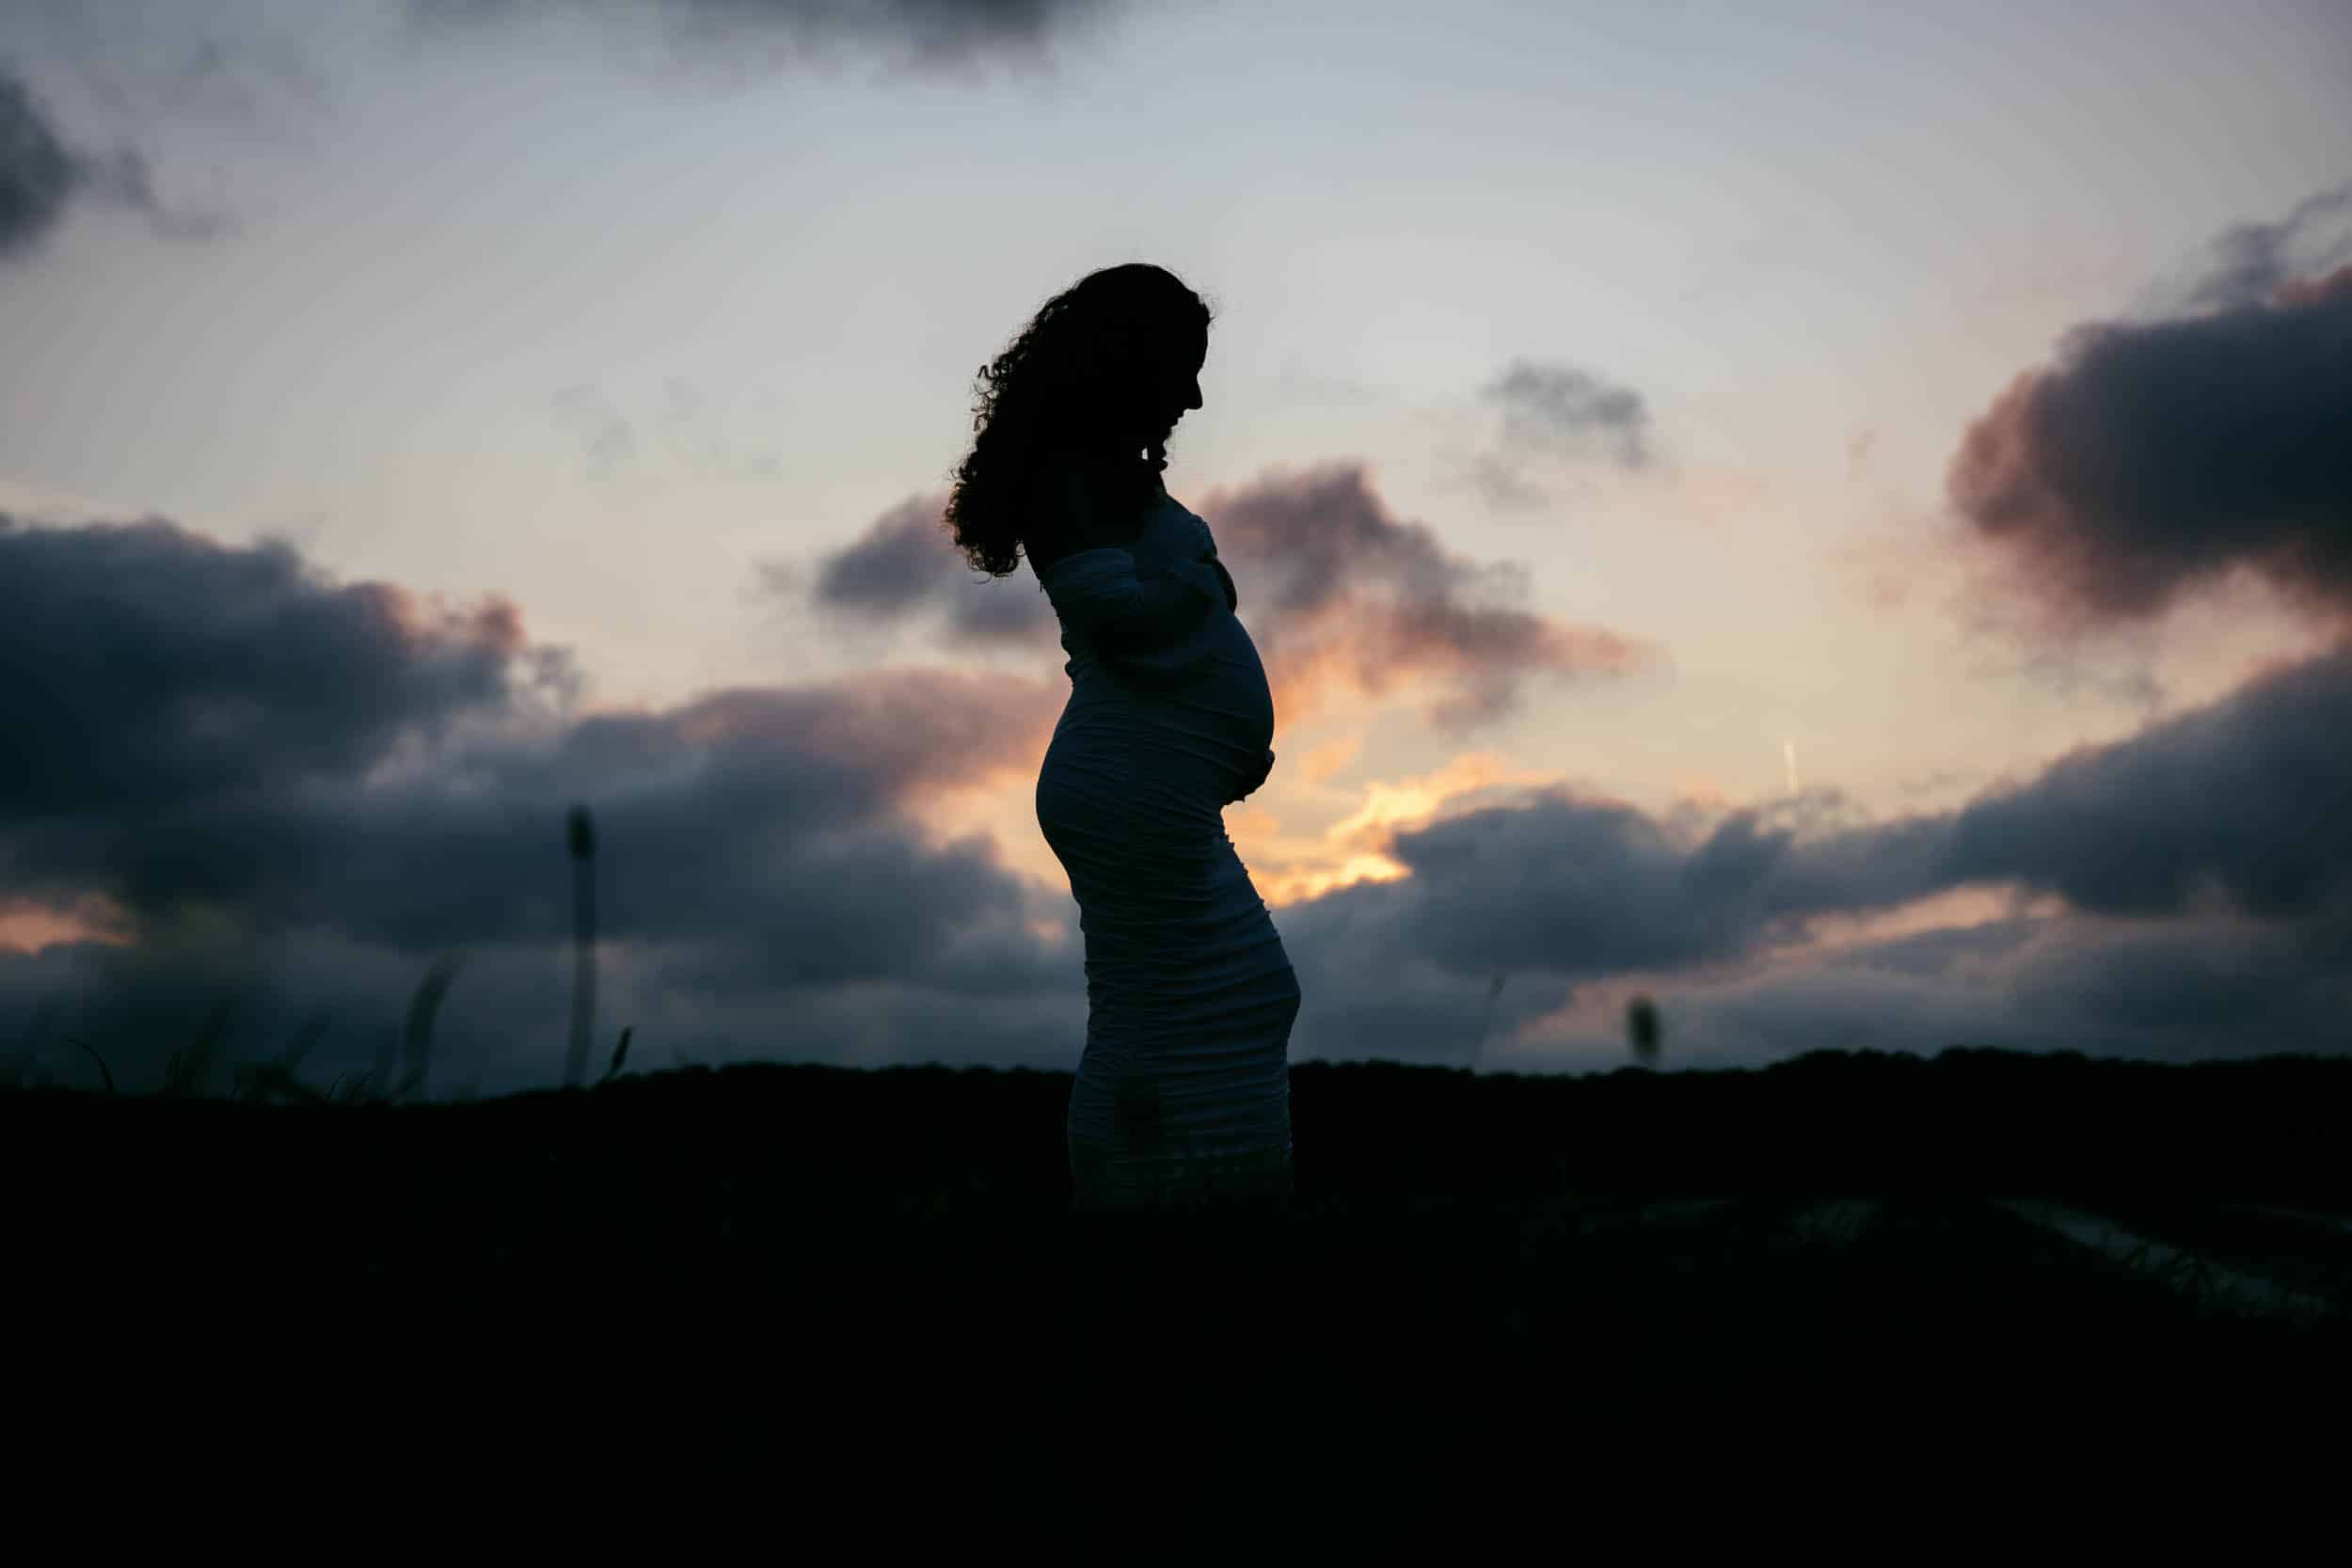 A beautiful maternity shoot capturing the silhouette of a pregnant woman standing in a field at sunset.